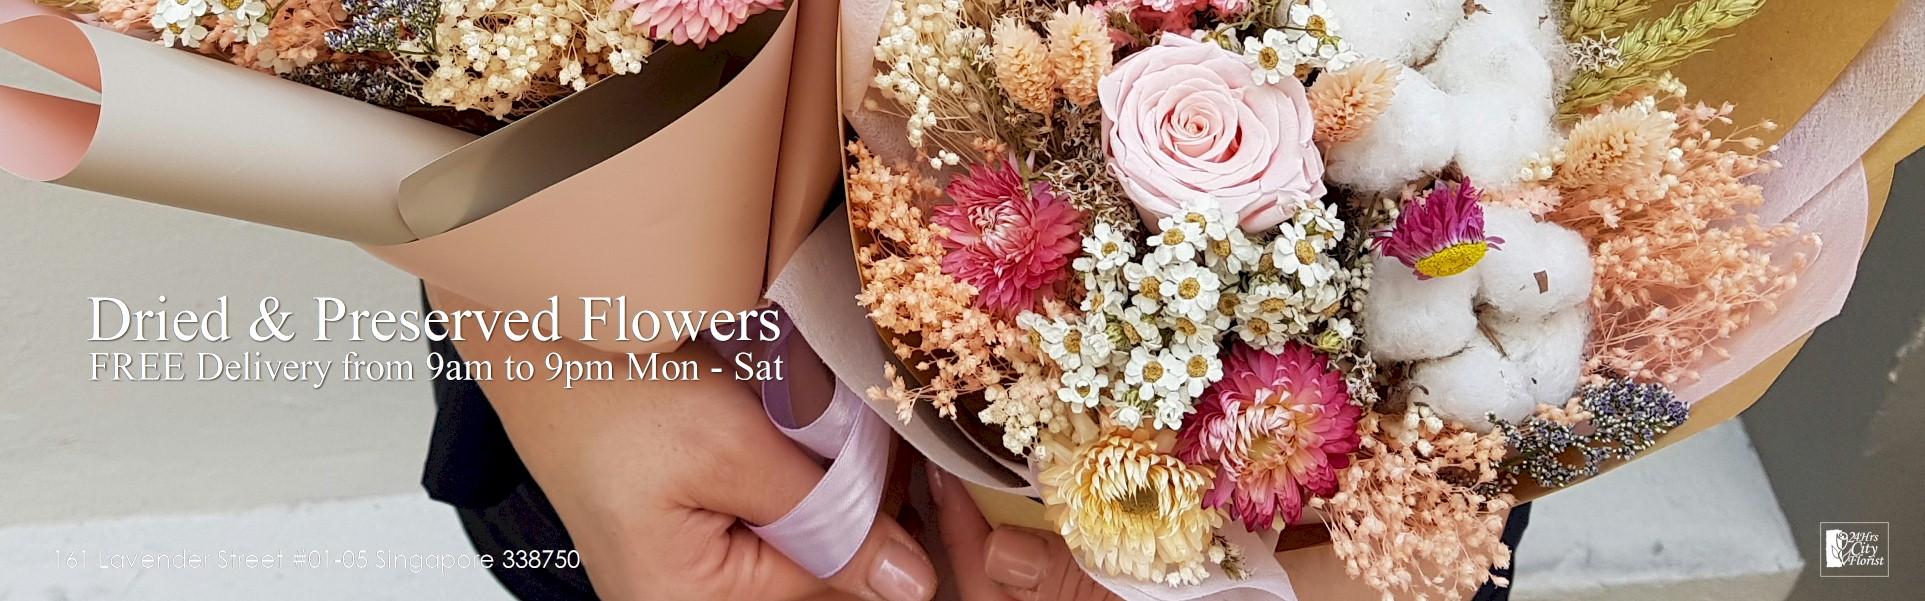 Natalie Horner: 24 Hour Flowers Delivery : Tea & Chat! | Cheap Next Day